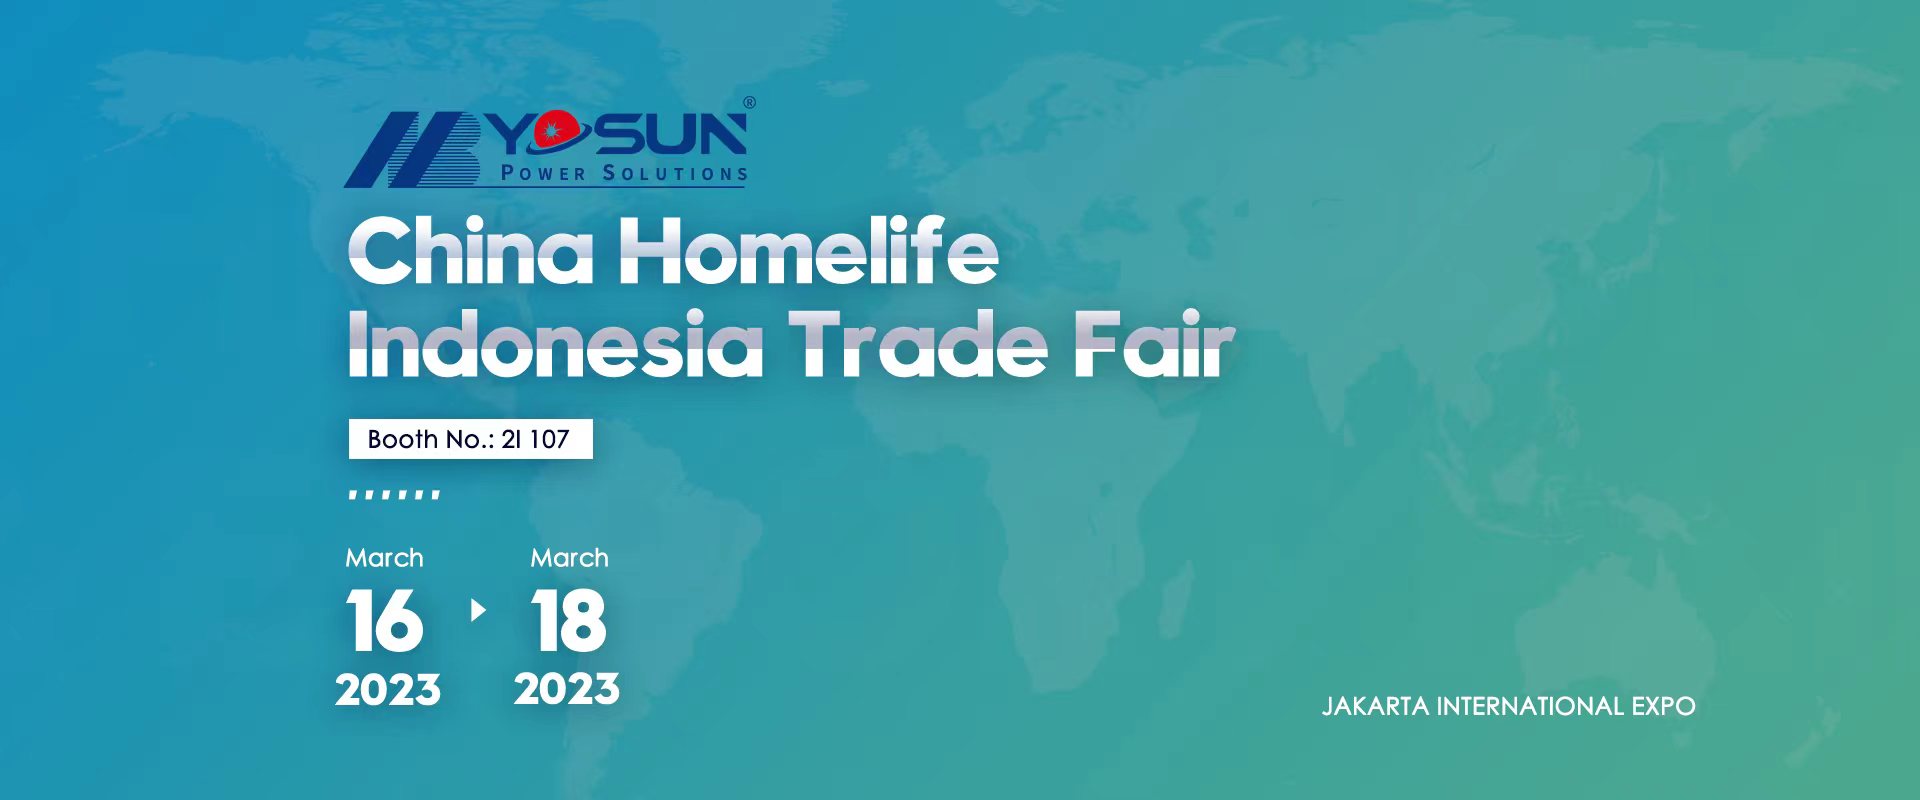 China Homelife Indonesia Trade Fair (march 16 – 18, 2023)